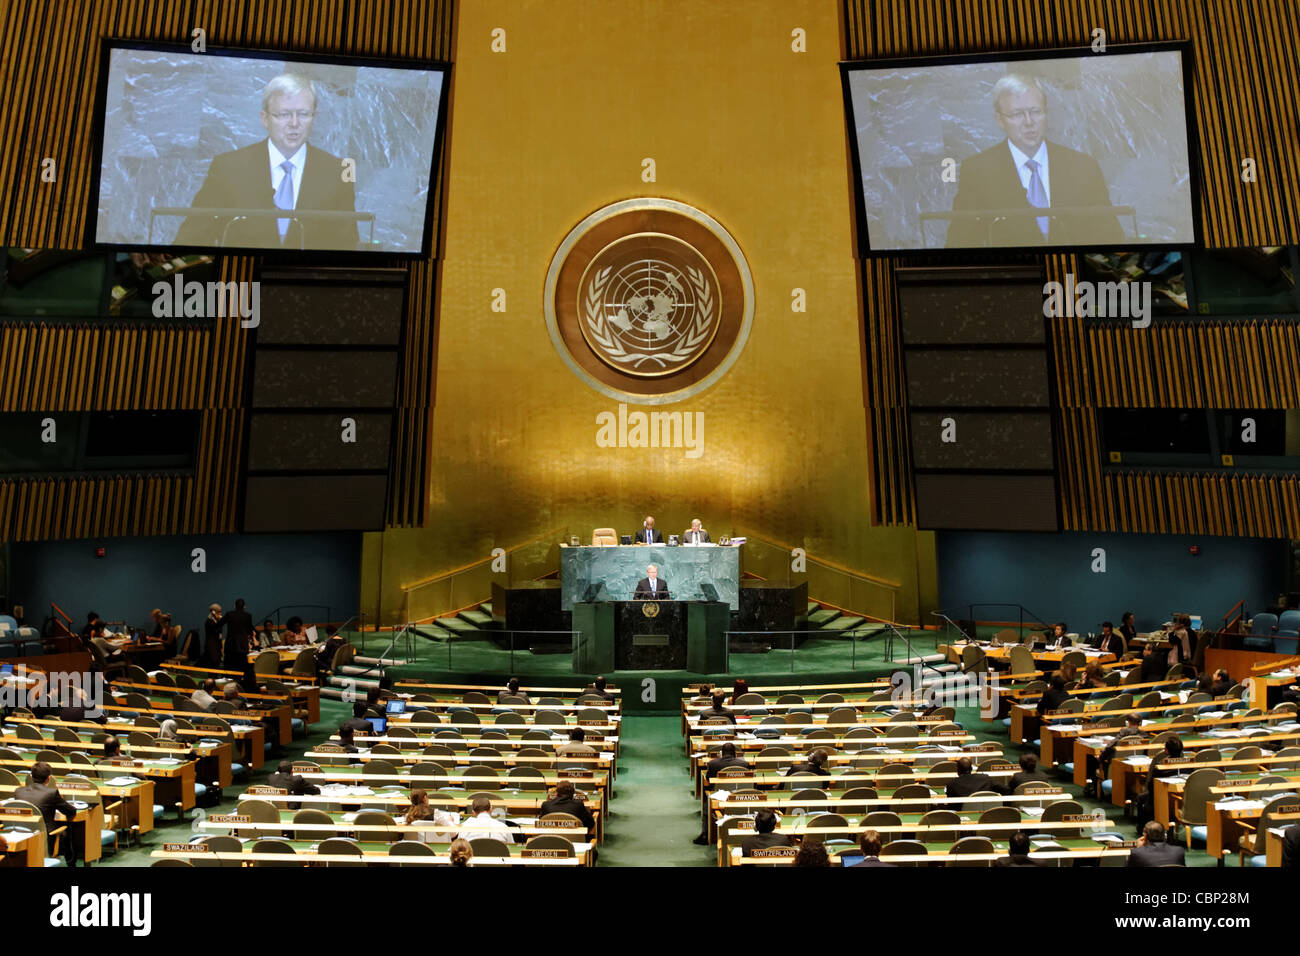 Australian Foreign Minister and former Prime Minister Kevin Rudd makes a speech during the 2010 United Nations General Assembly Stock Photo